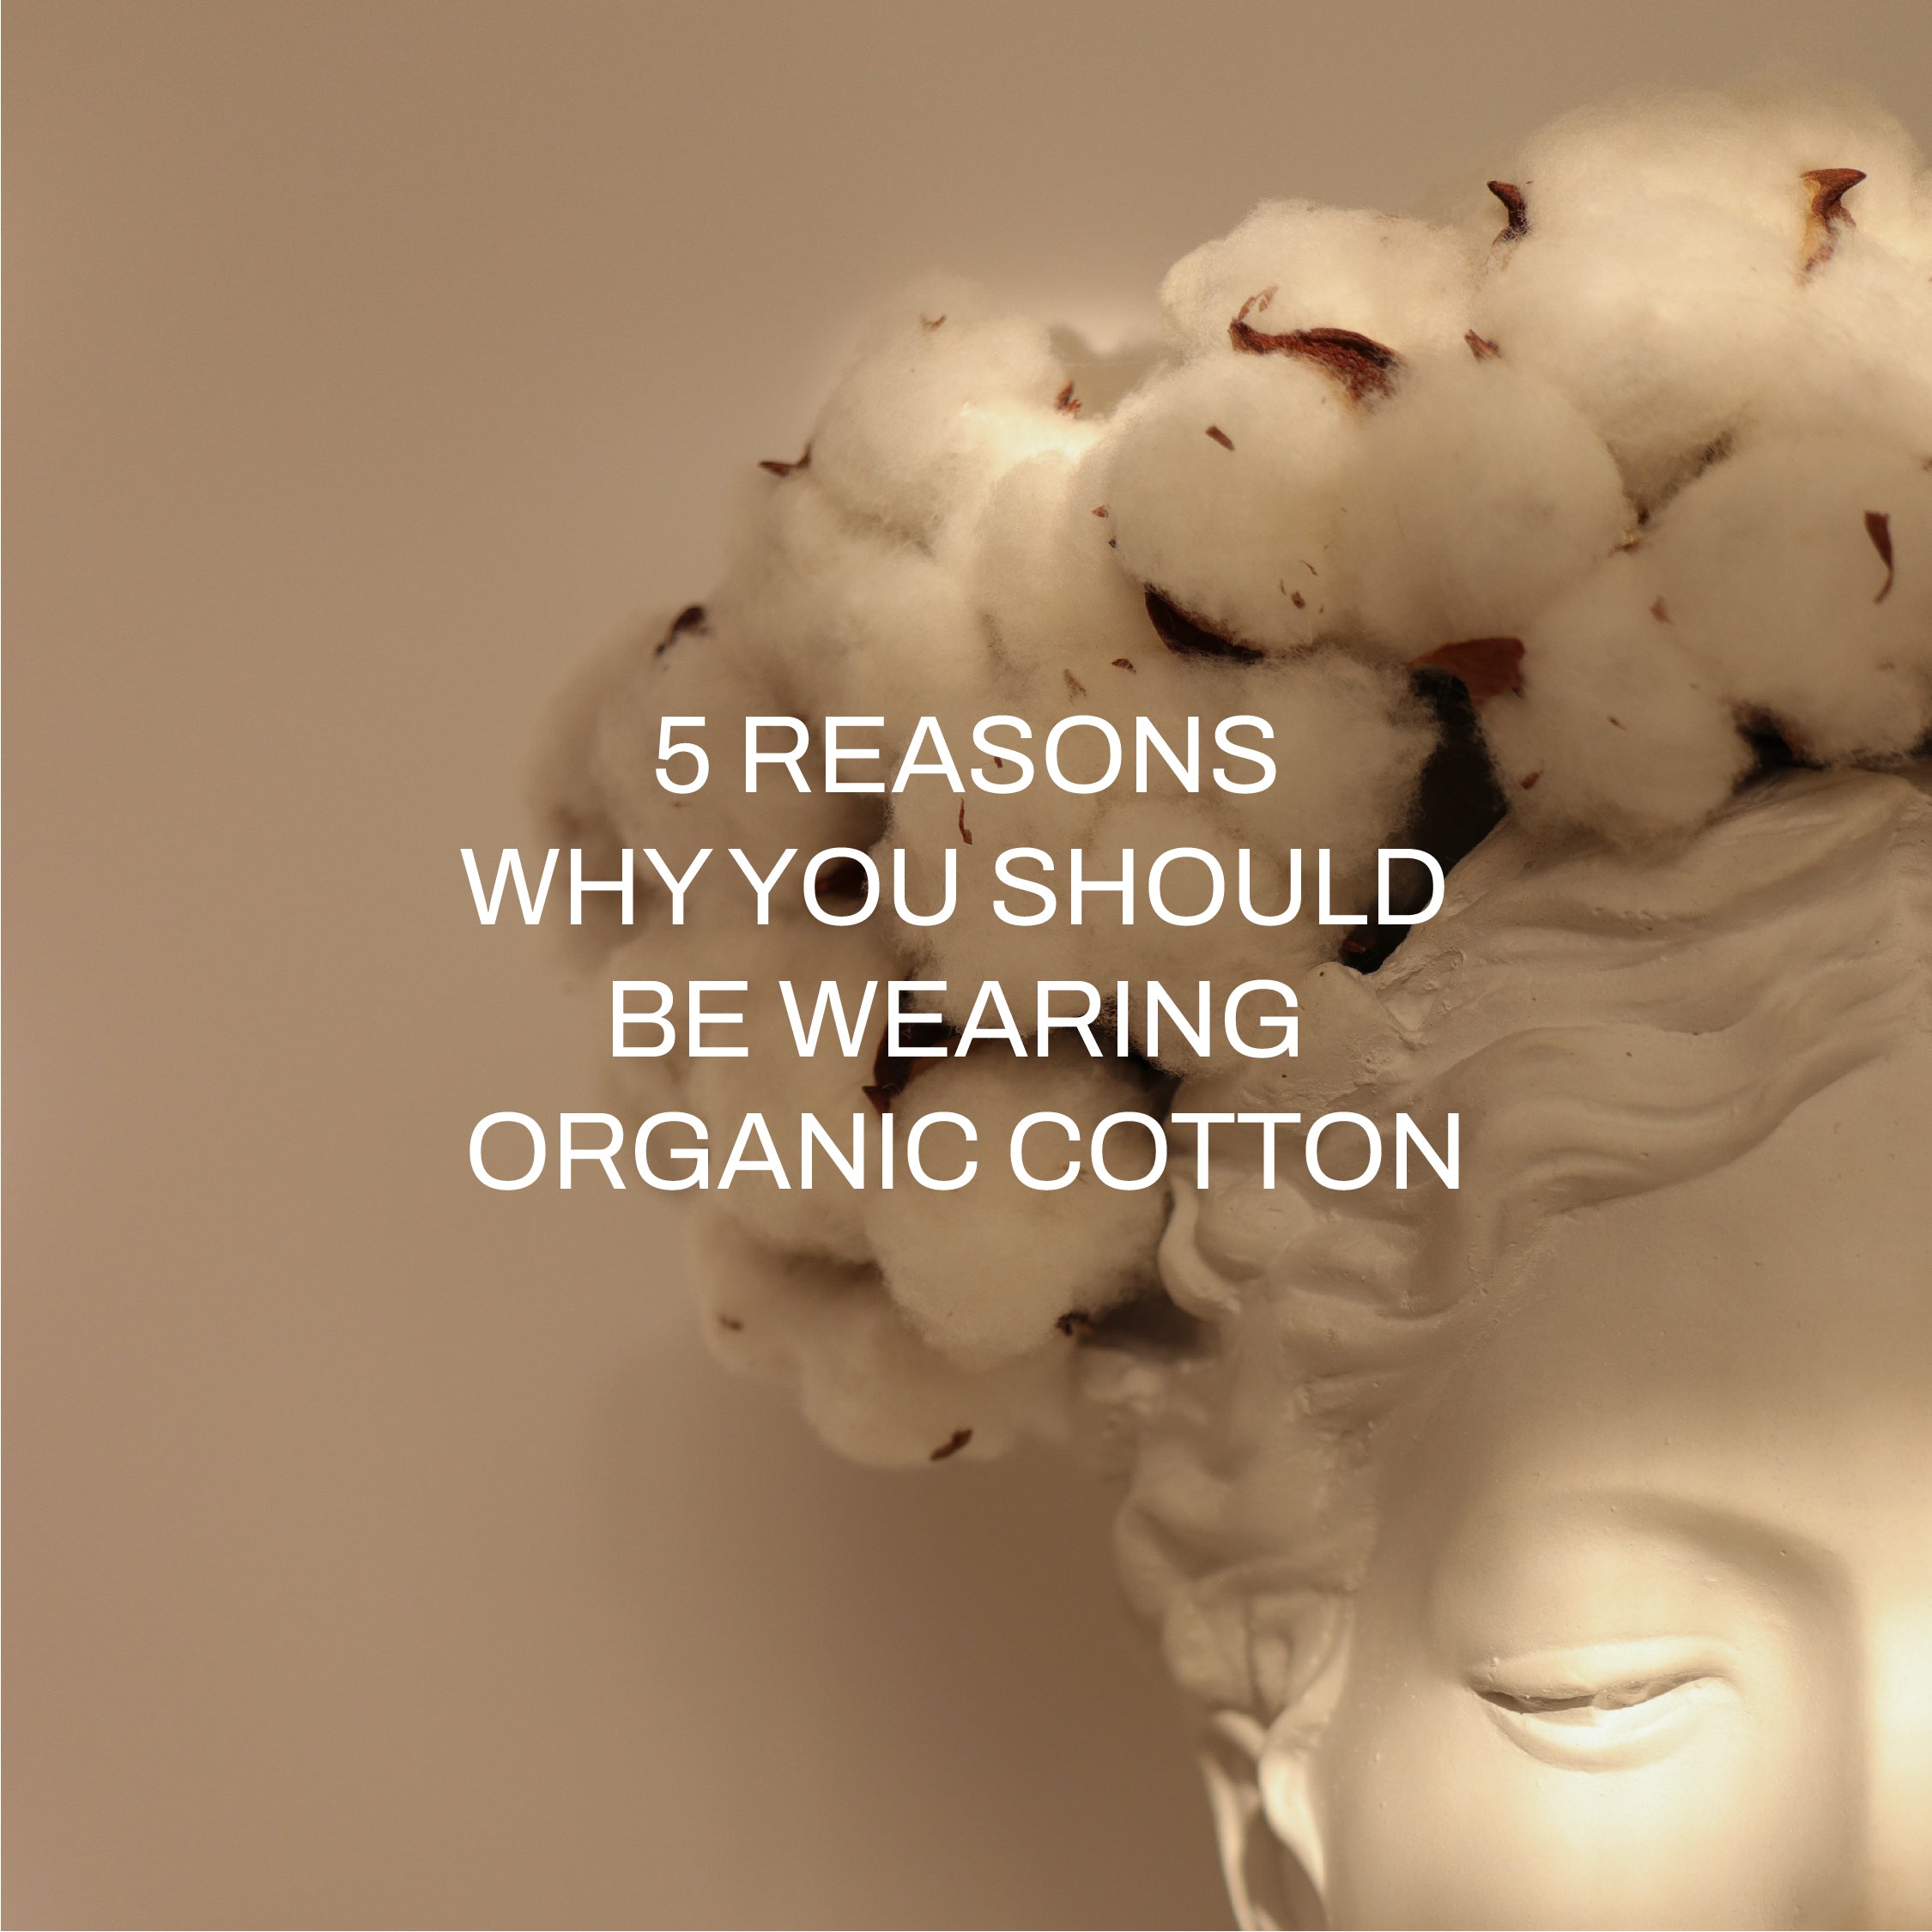 5 Reasons Why You Should be Wearing Organic Cotton